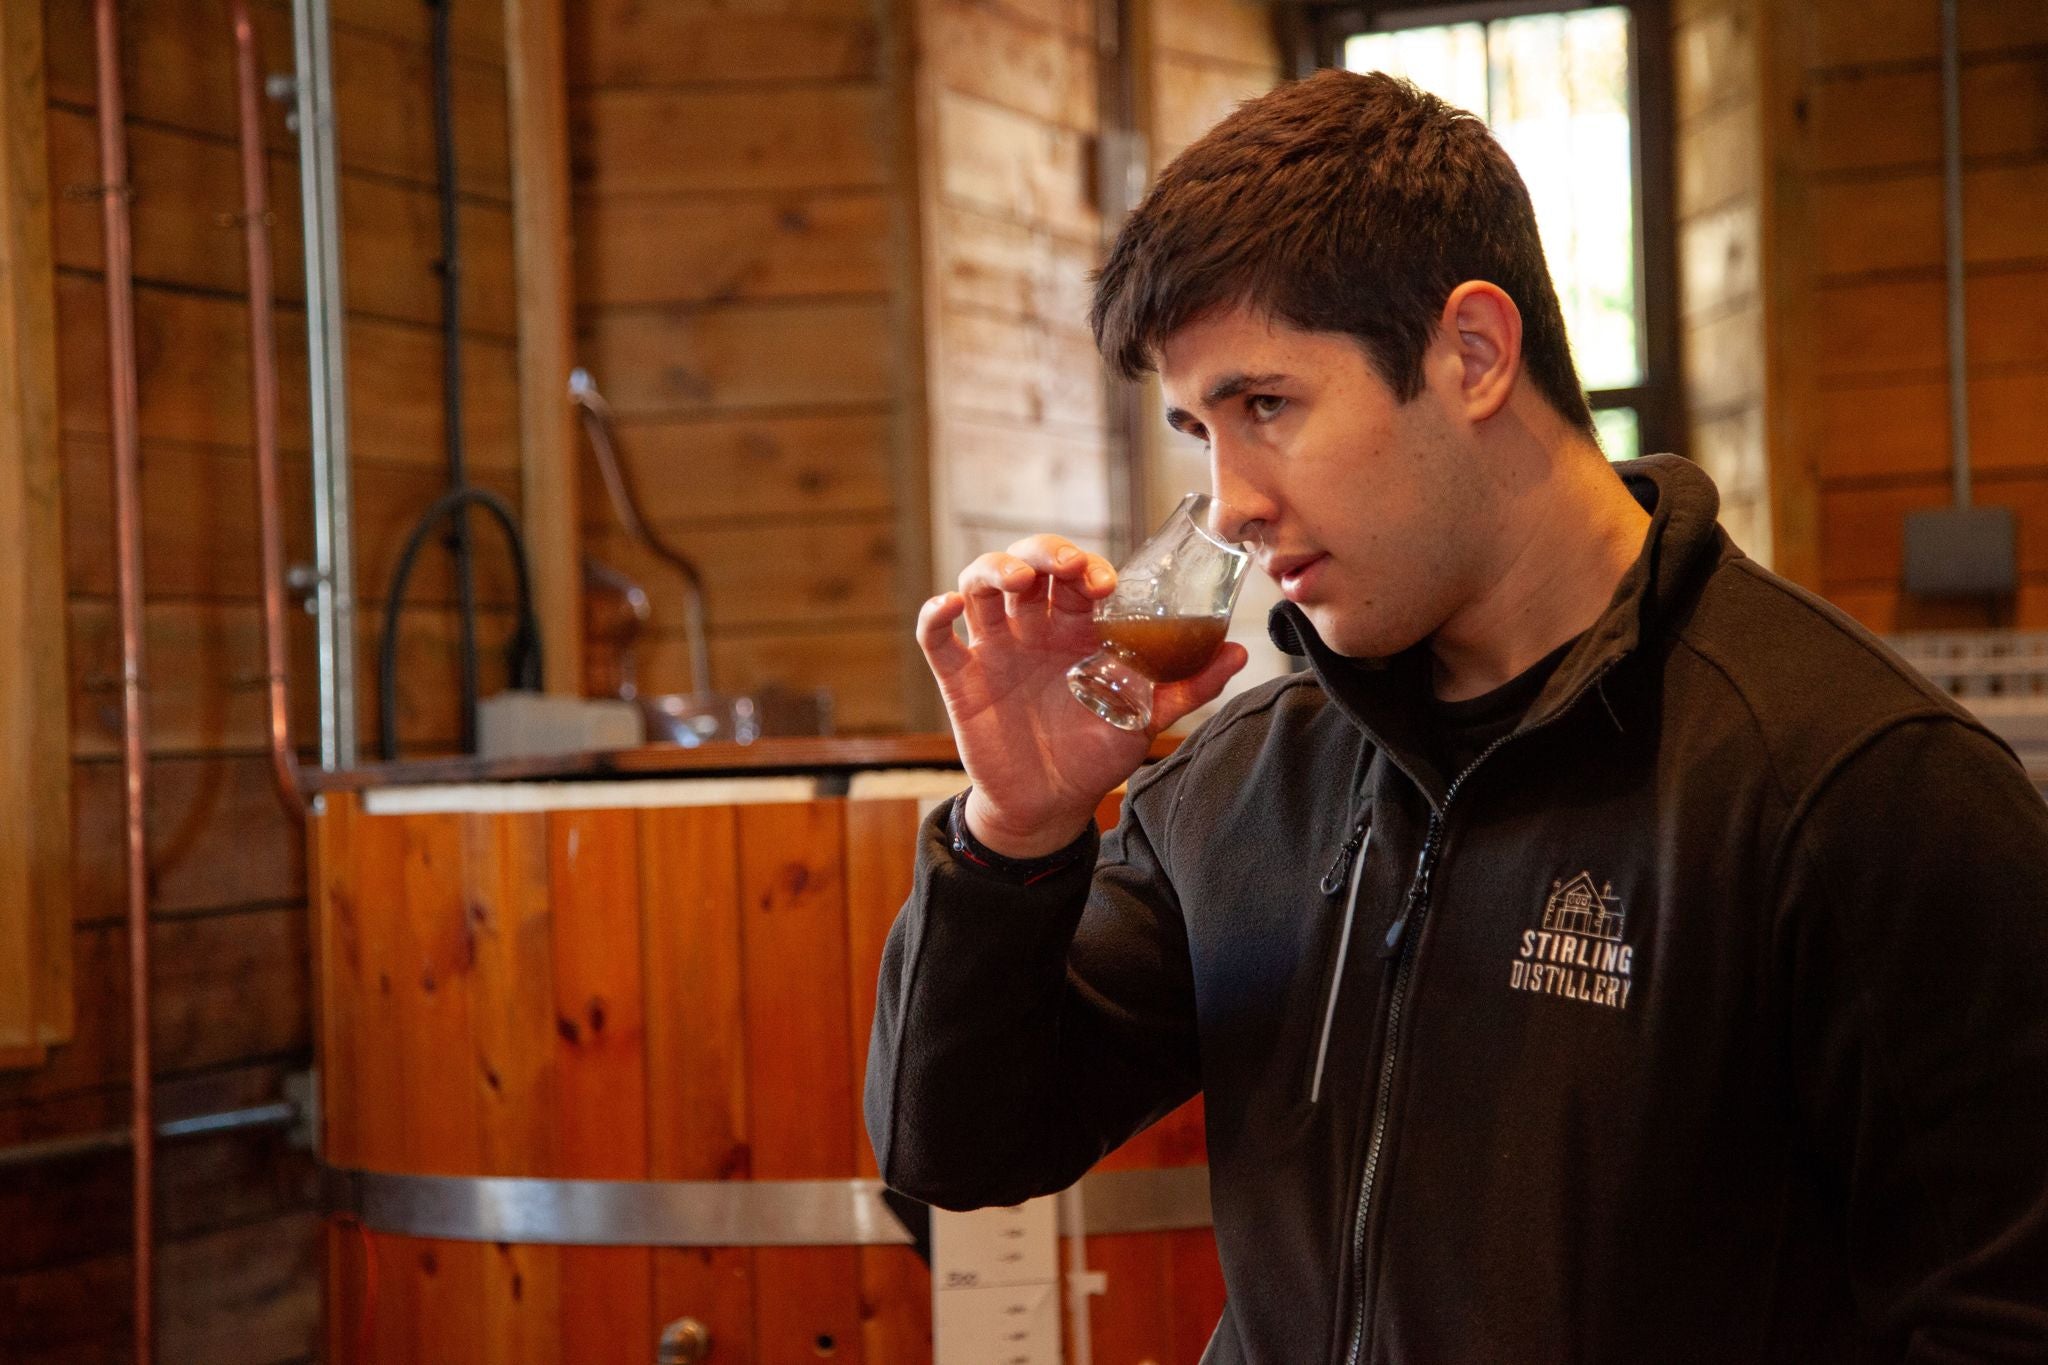 Stirling Distillery Offering Exclusive Whisky Tasting